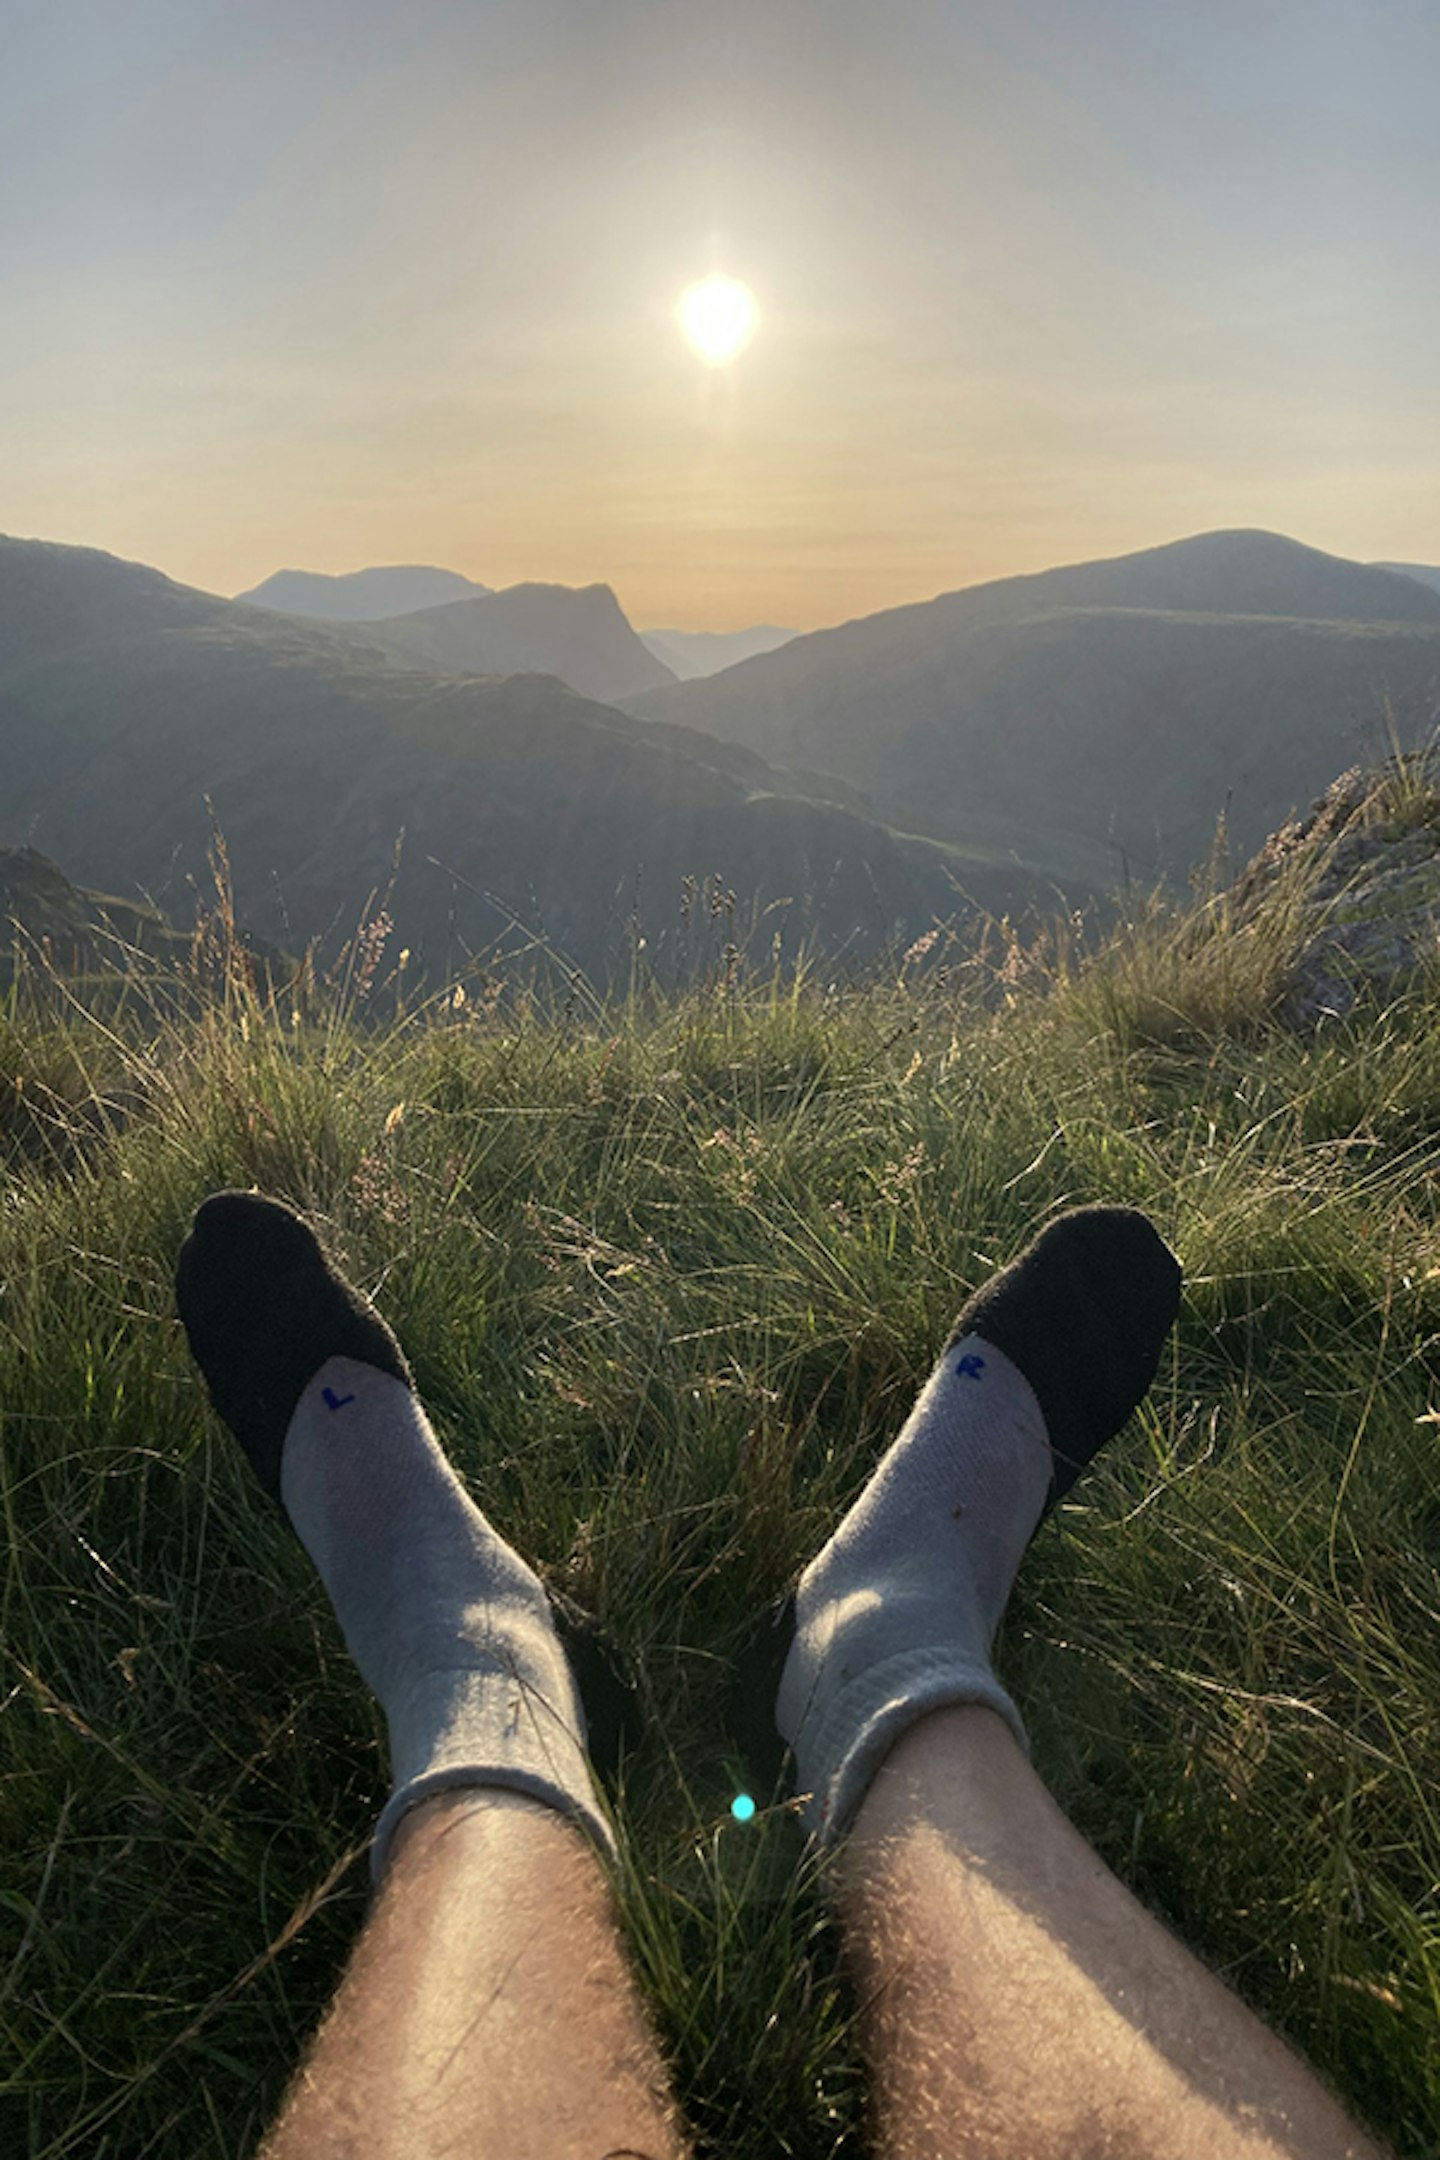 socks on feet on grass in the sunshine in the evening on a mountain